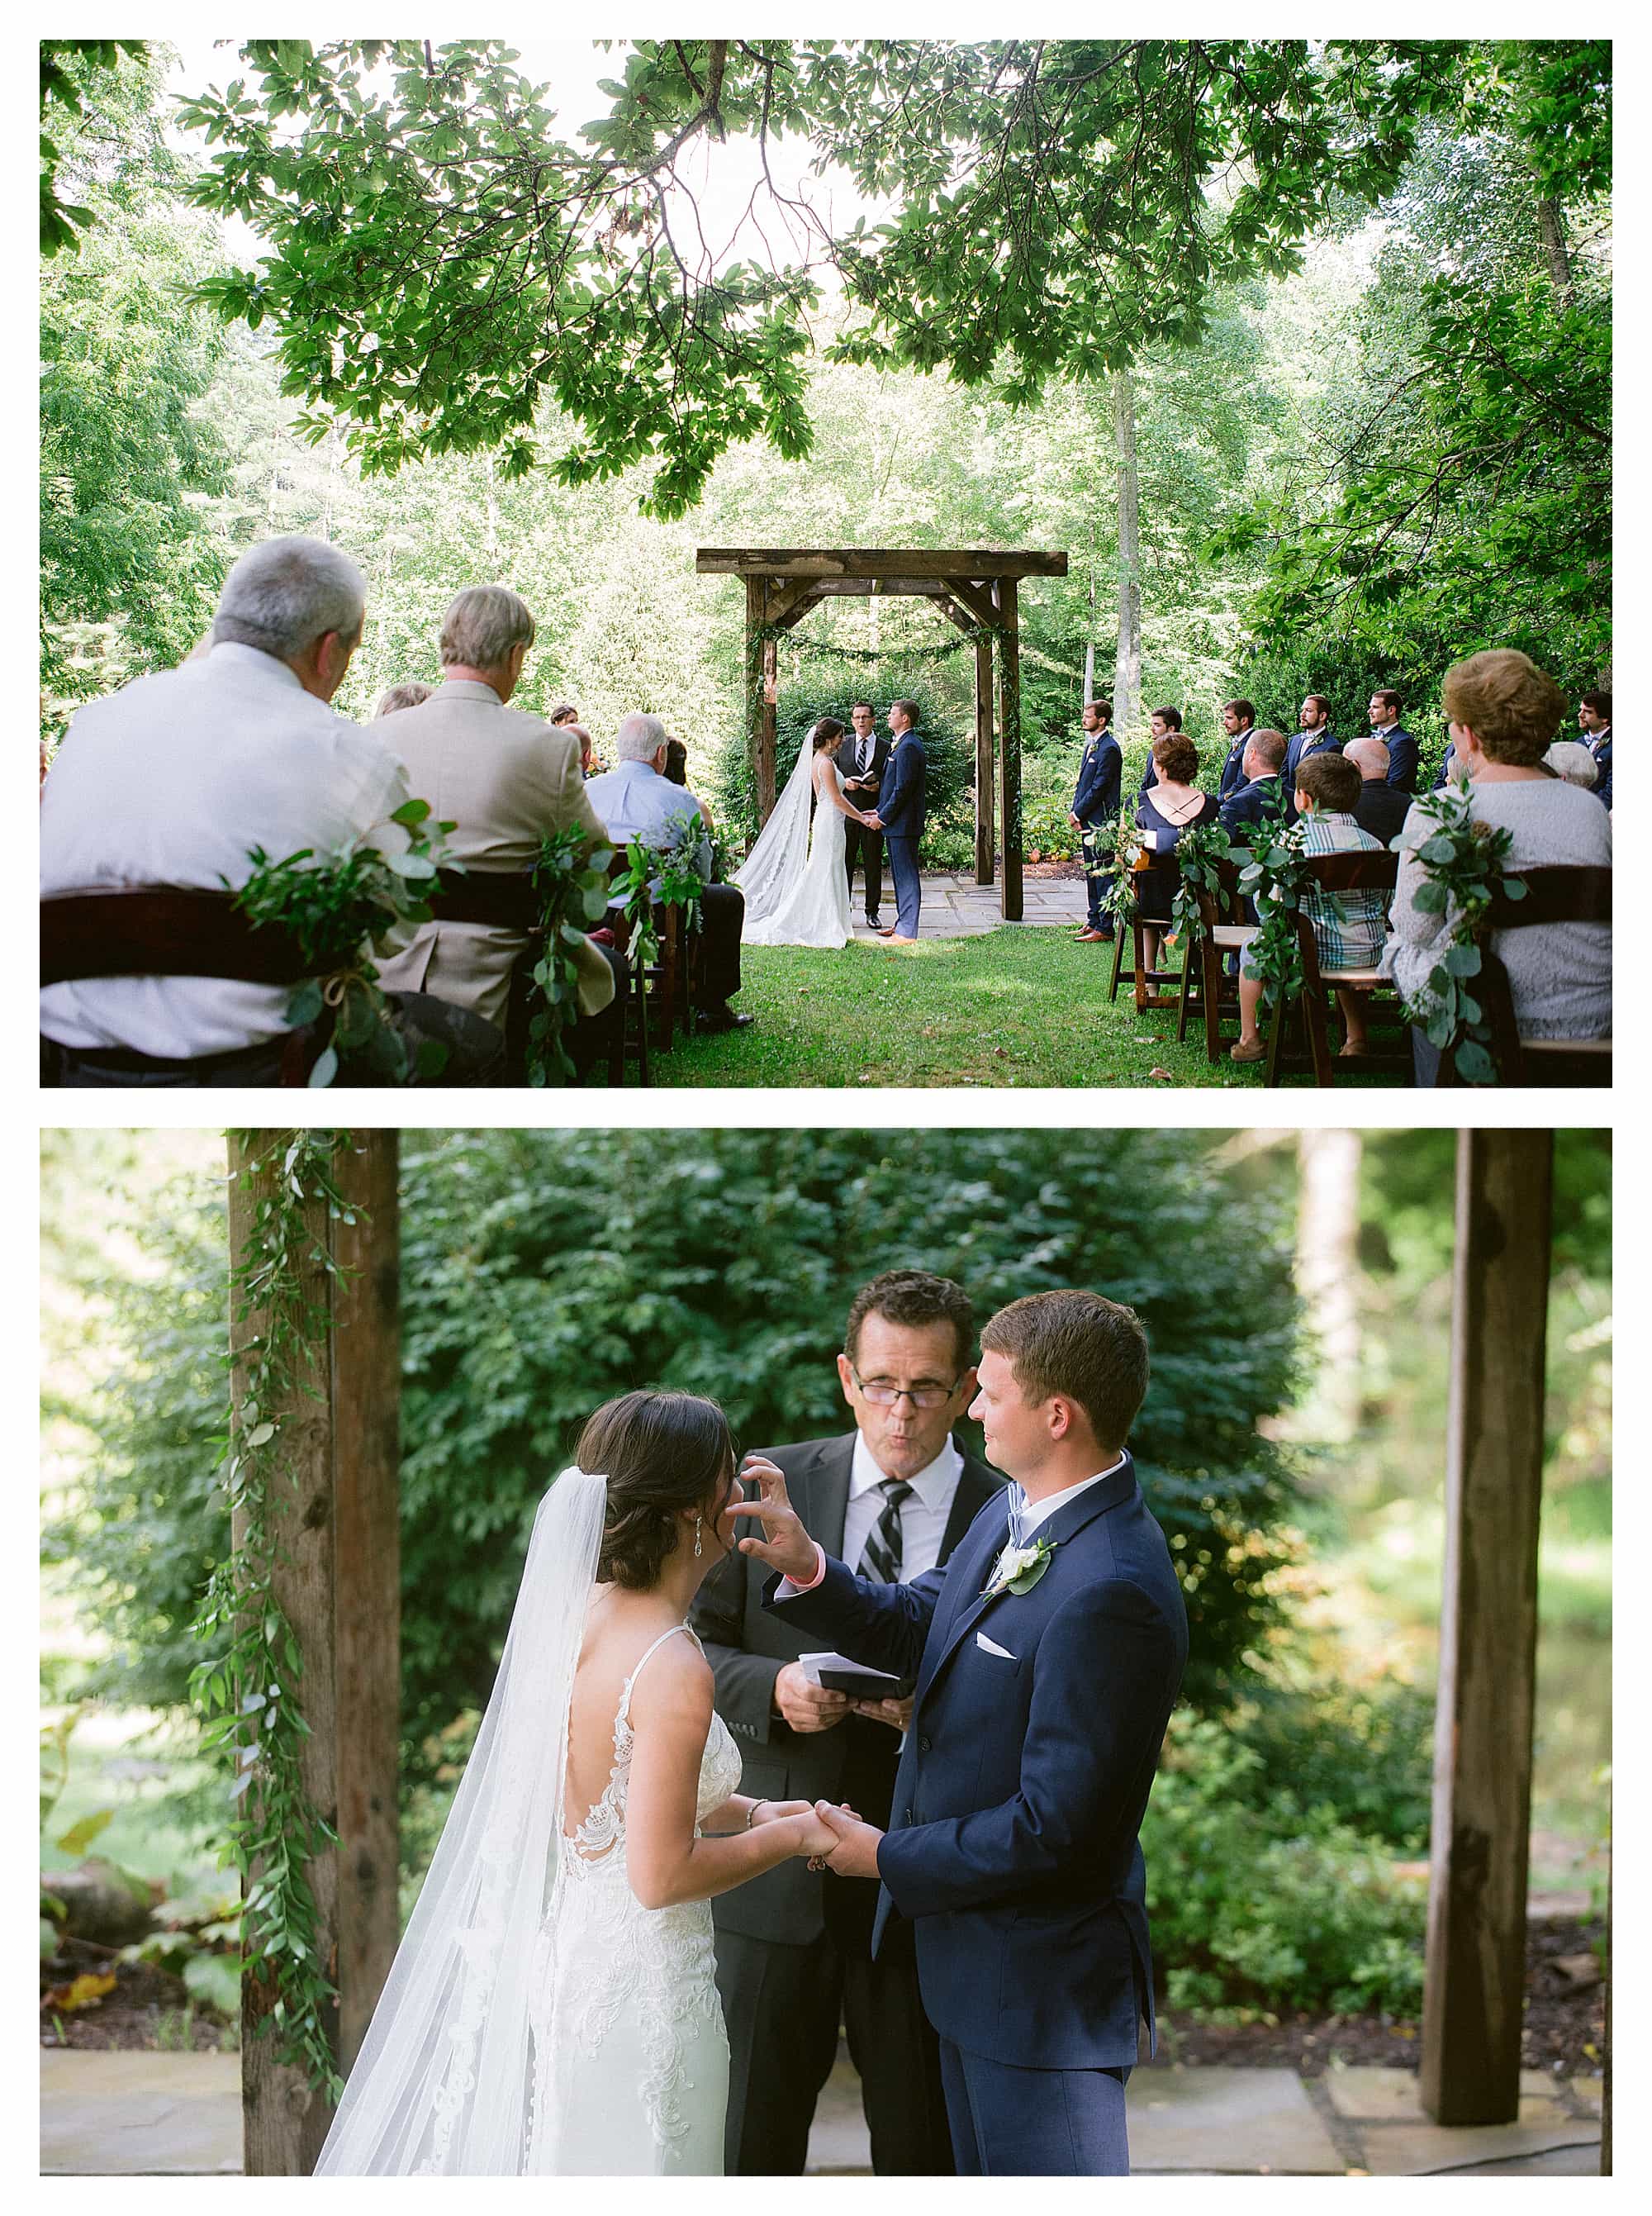 Bride and groom holding hands during outdoor wedding ceremony under arbor surrounded by trees and greenery